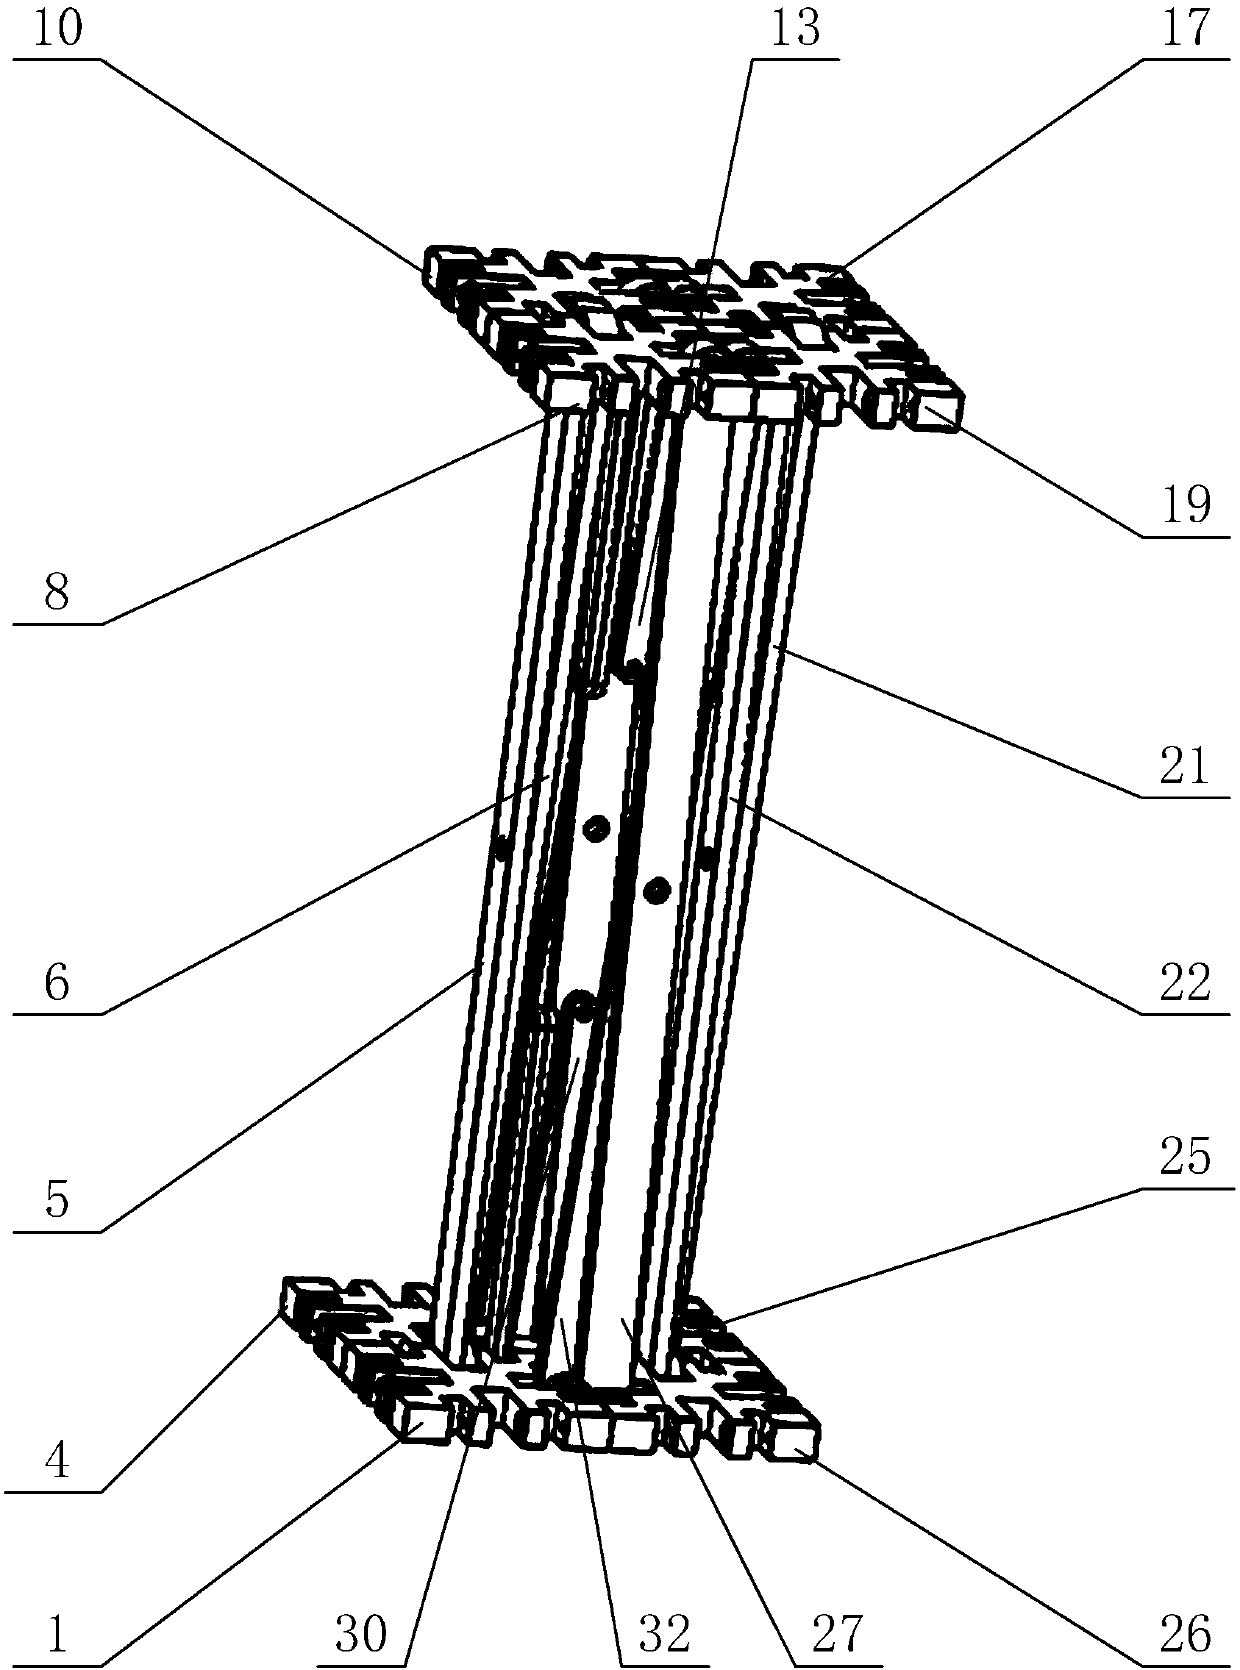 Single-degree-of-freedom constrained scissor-type deployable unit and its spatially deployable mechanism